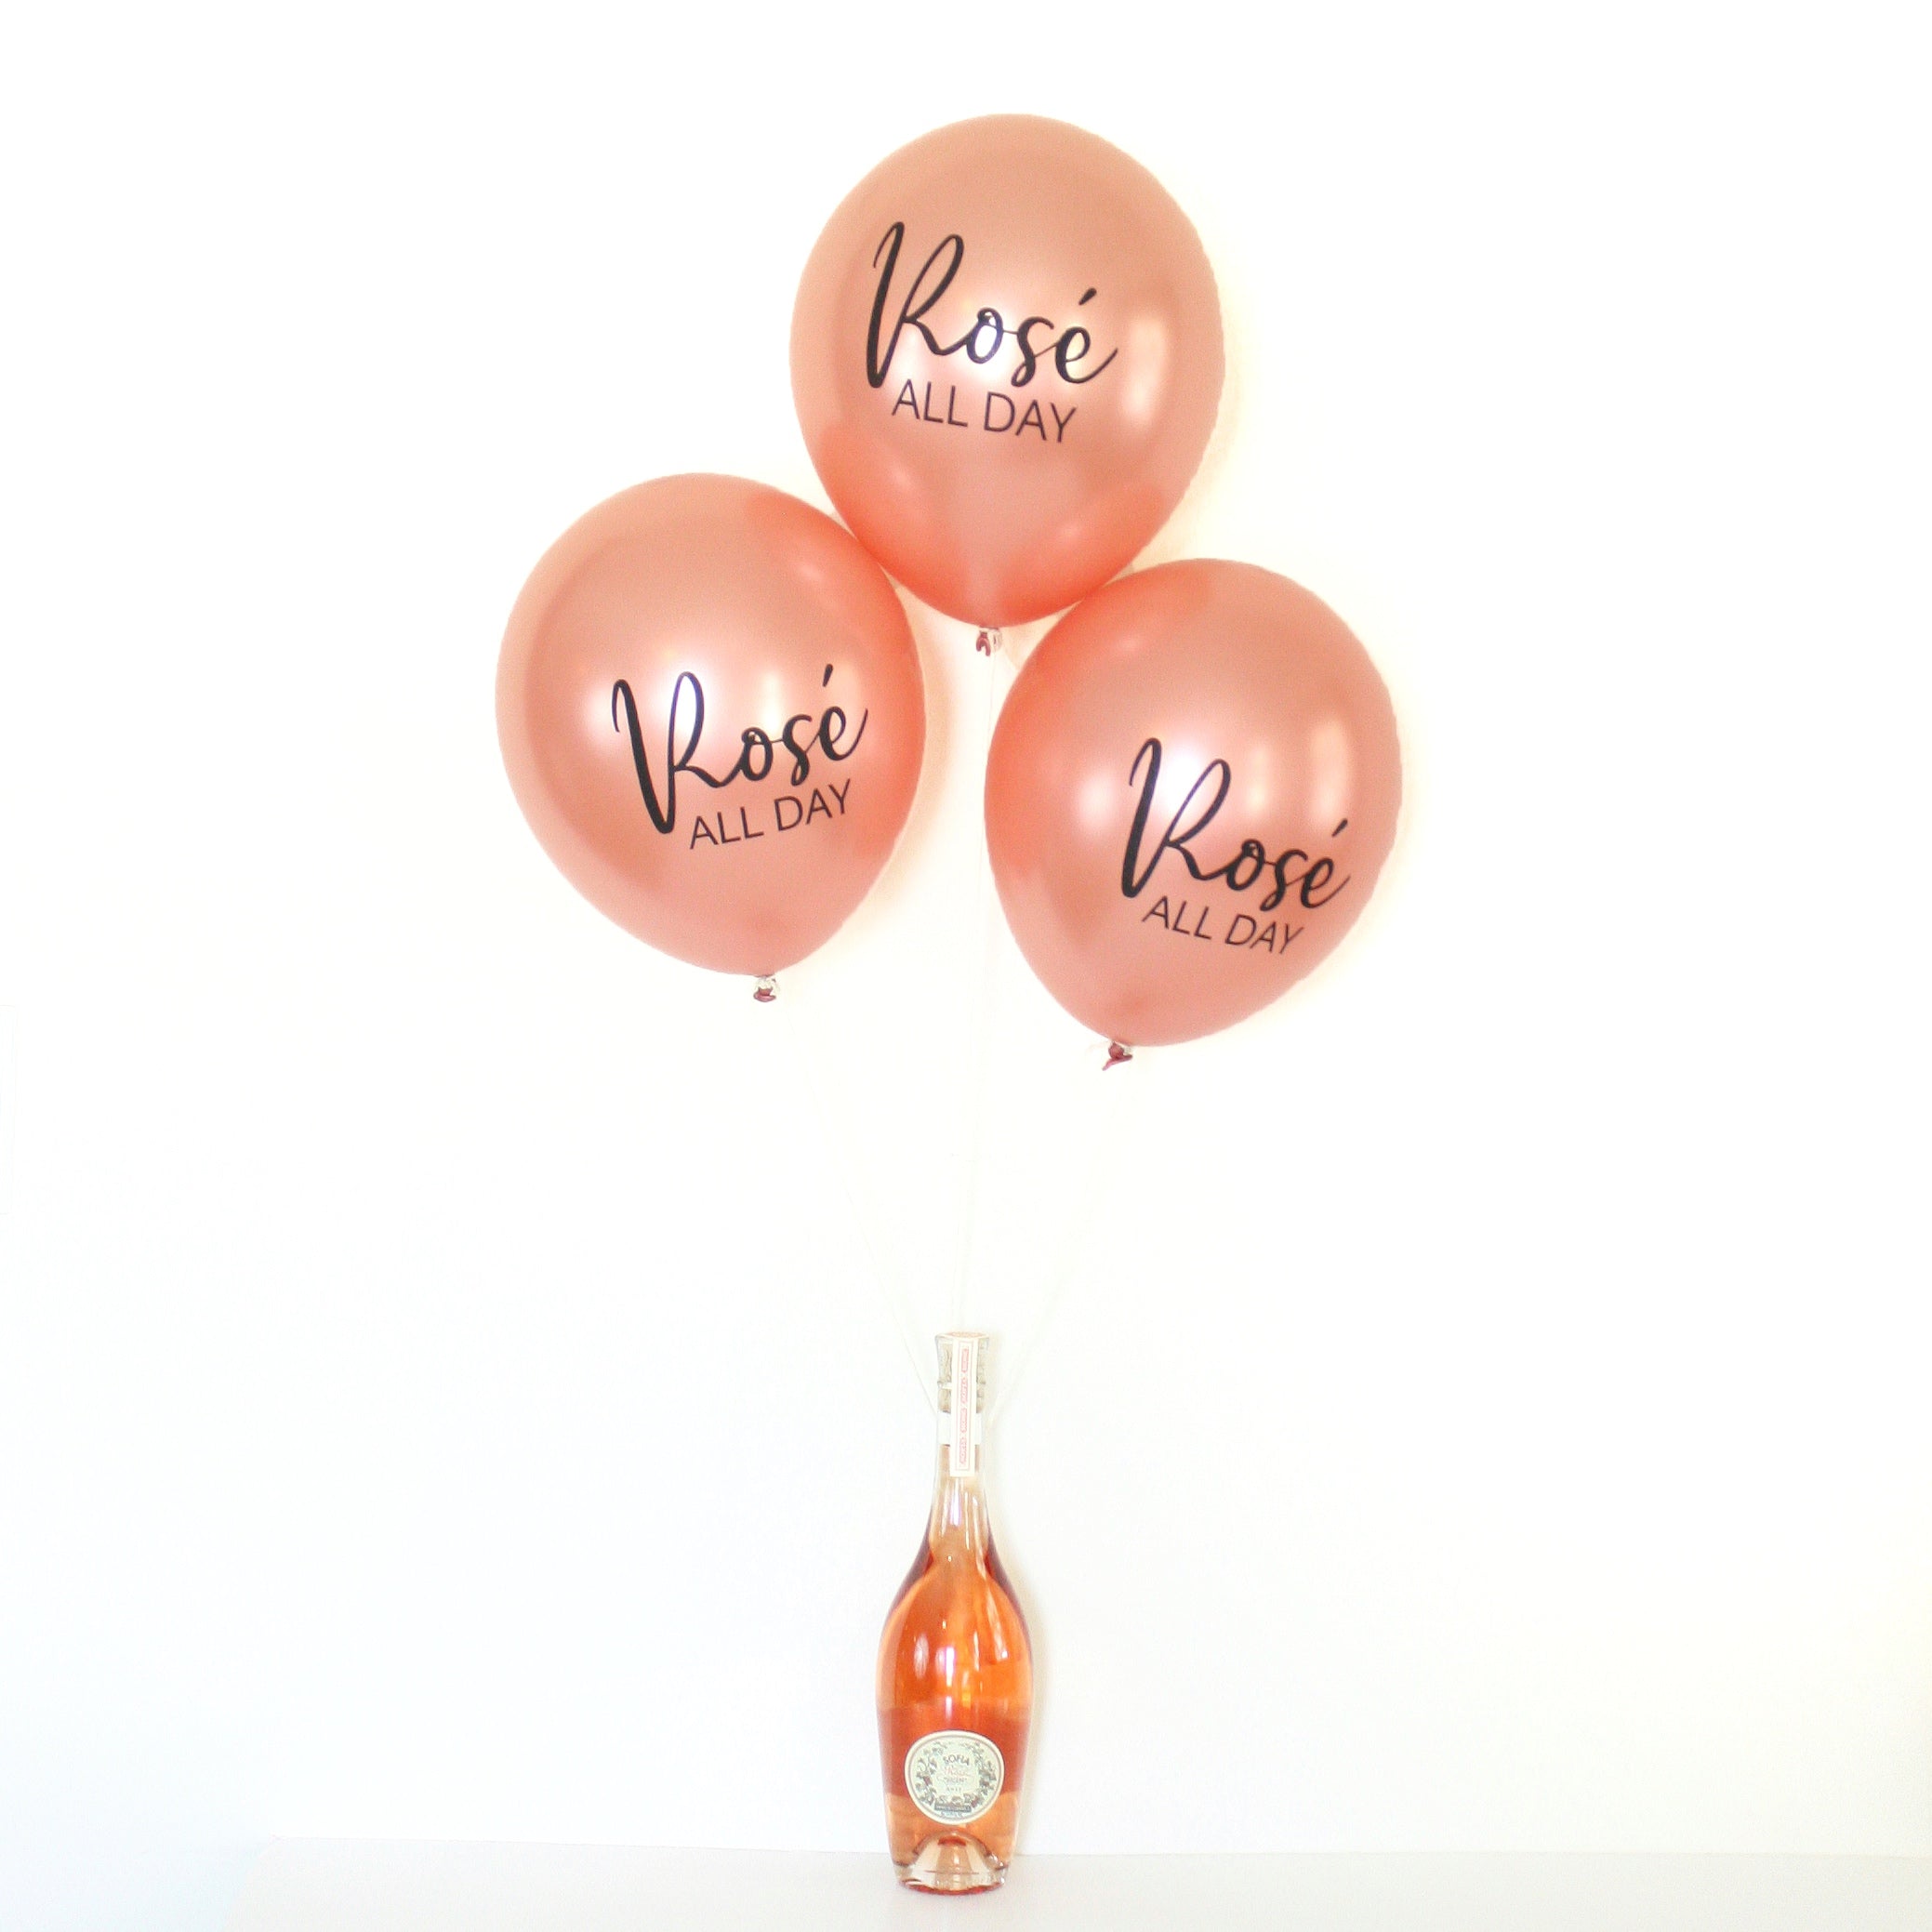 Rosé All Day - Hand Lettered Balloons